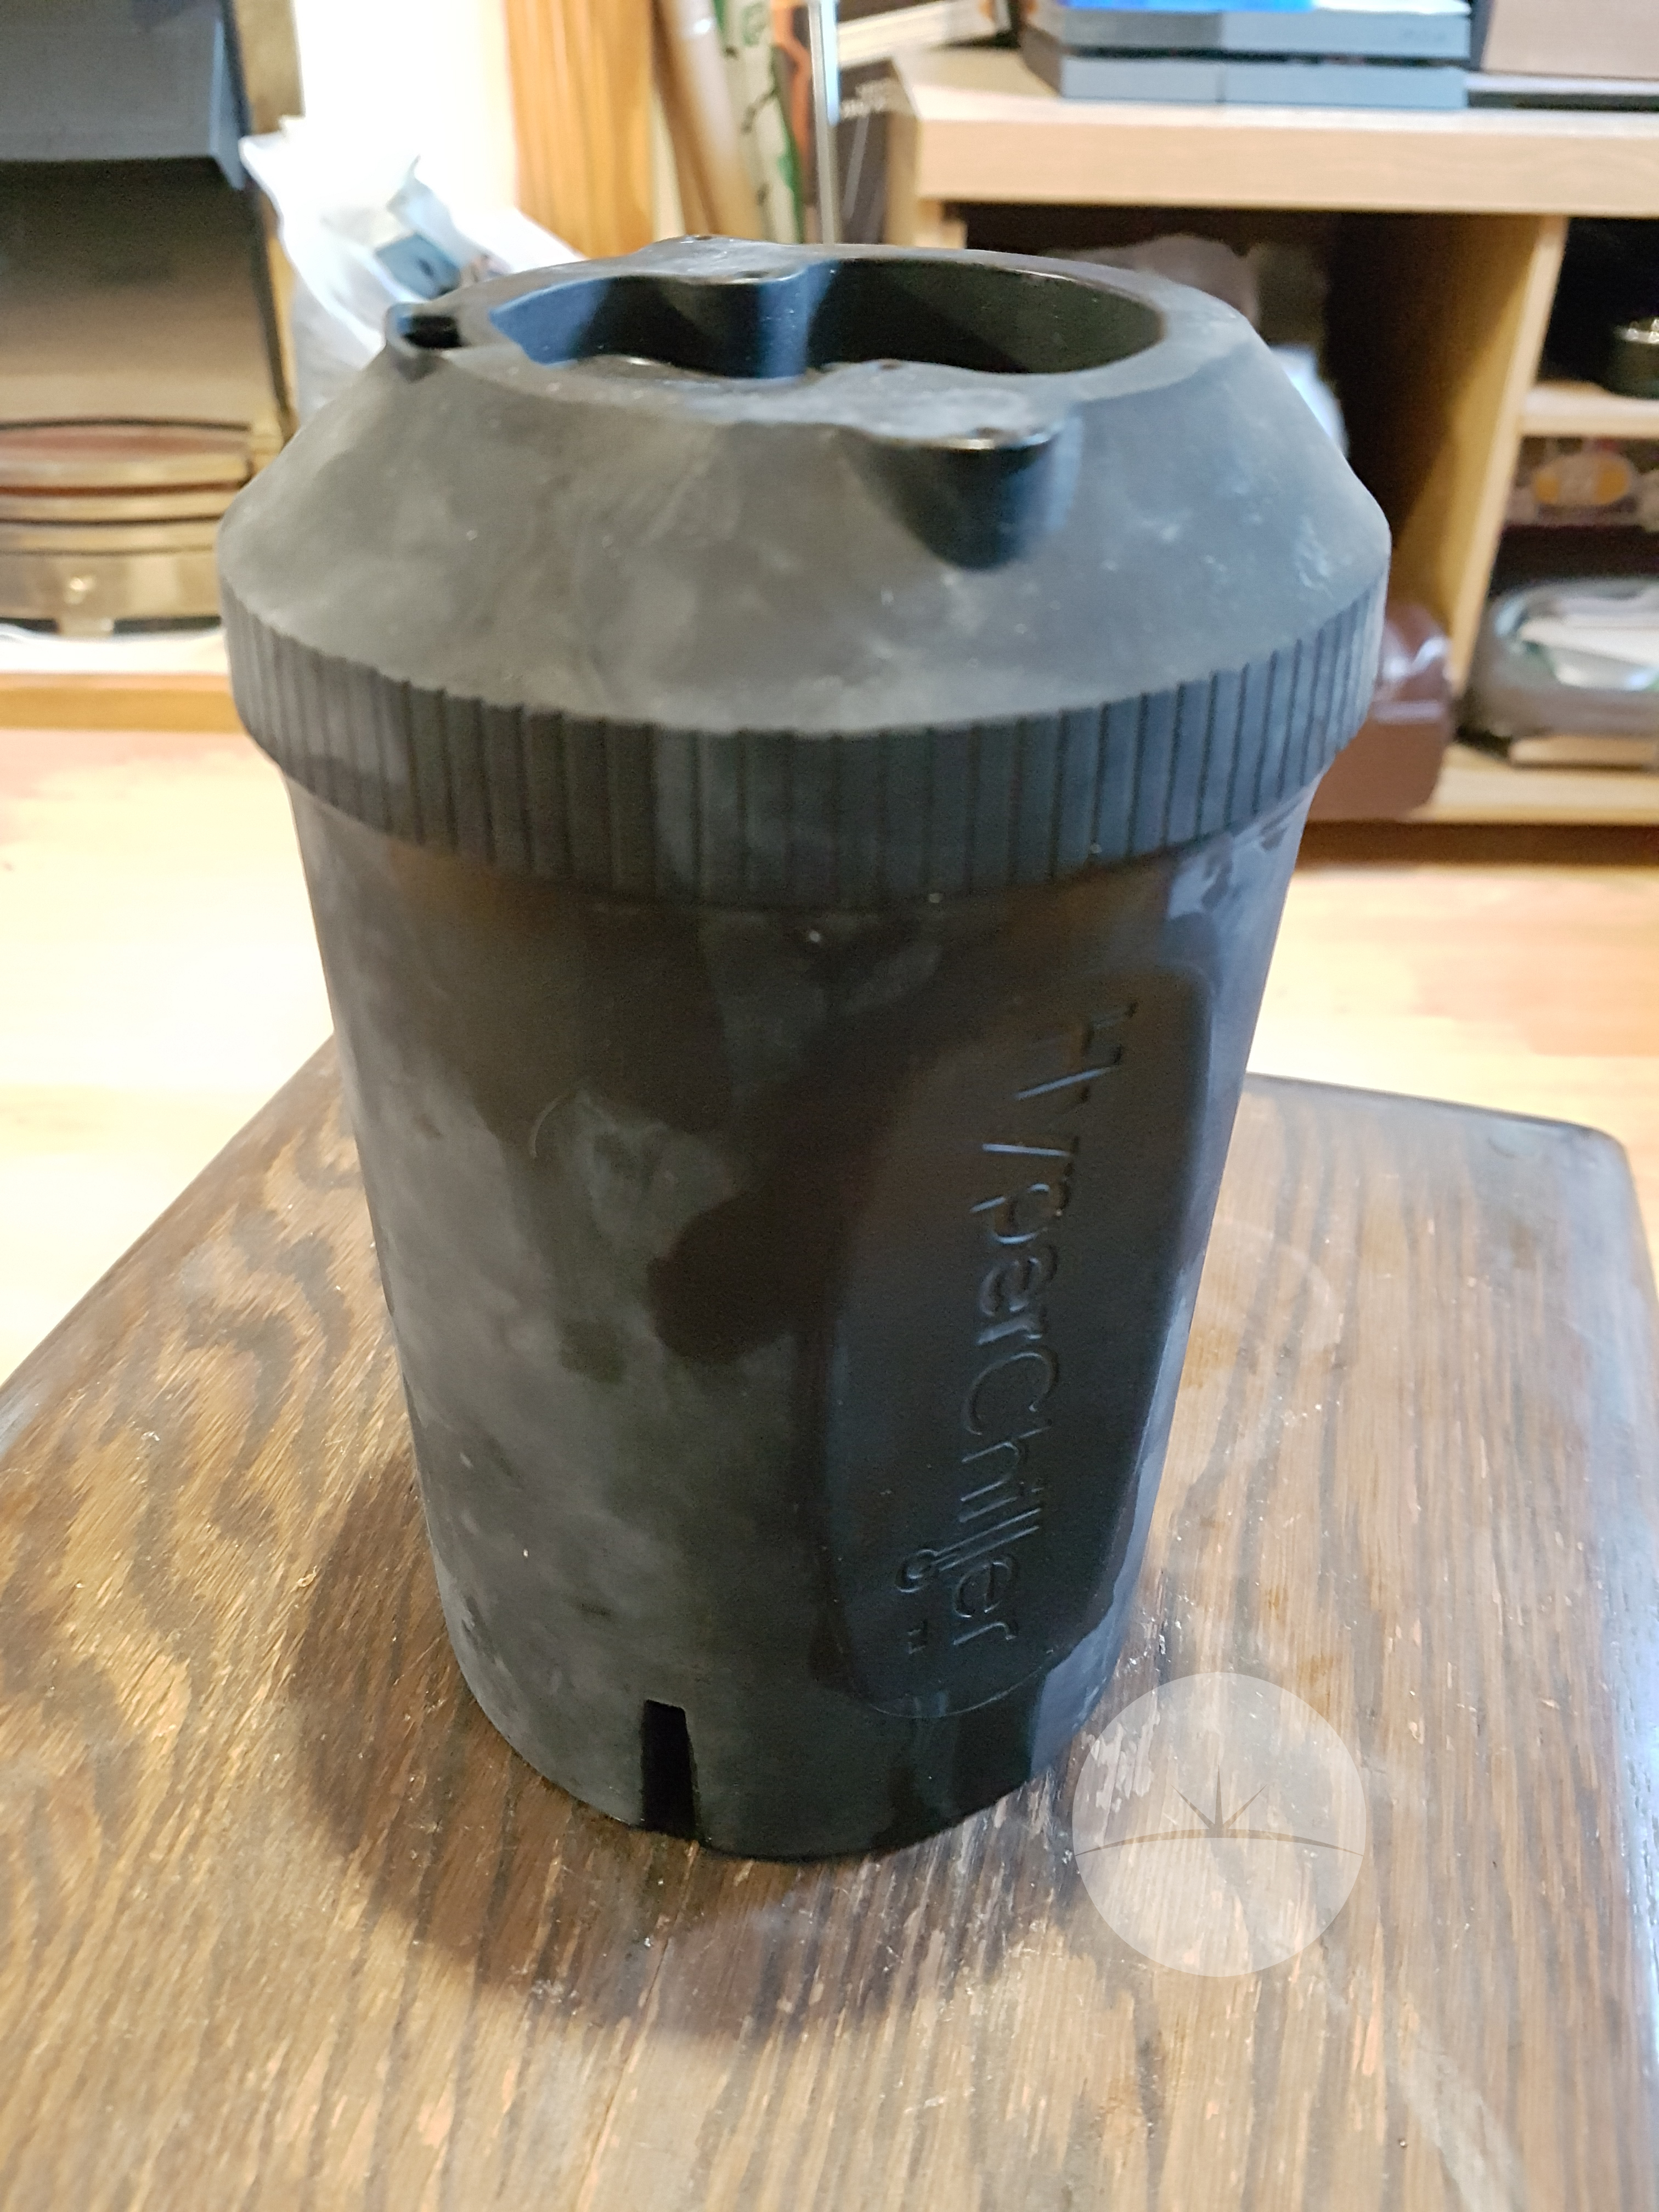 HyperChiller Iced Coffee Maker Review - DroidHorizon